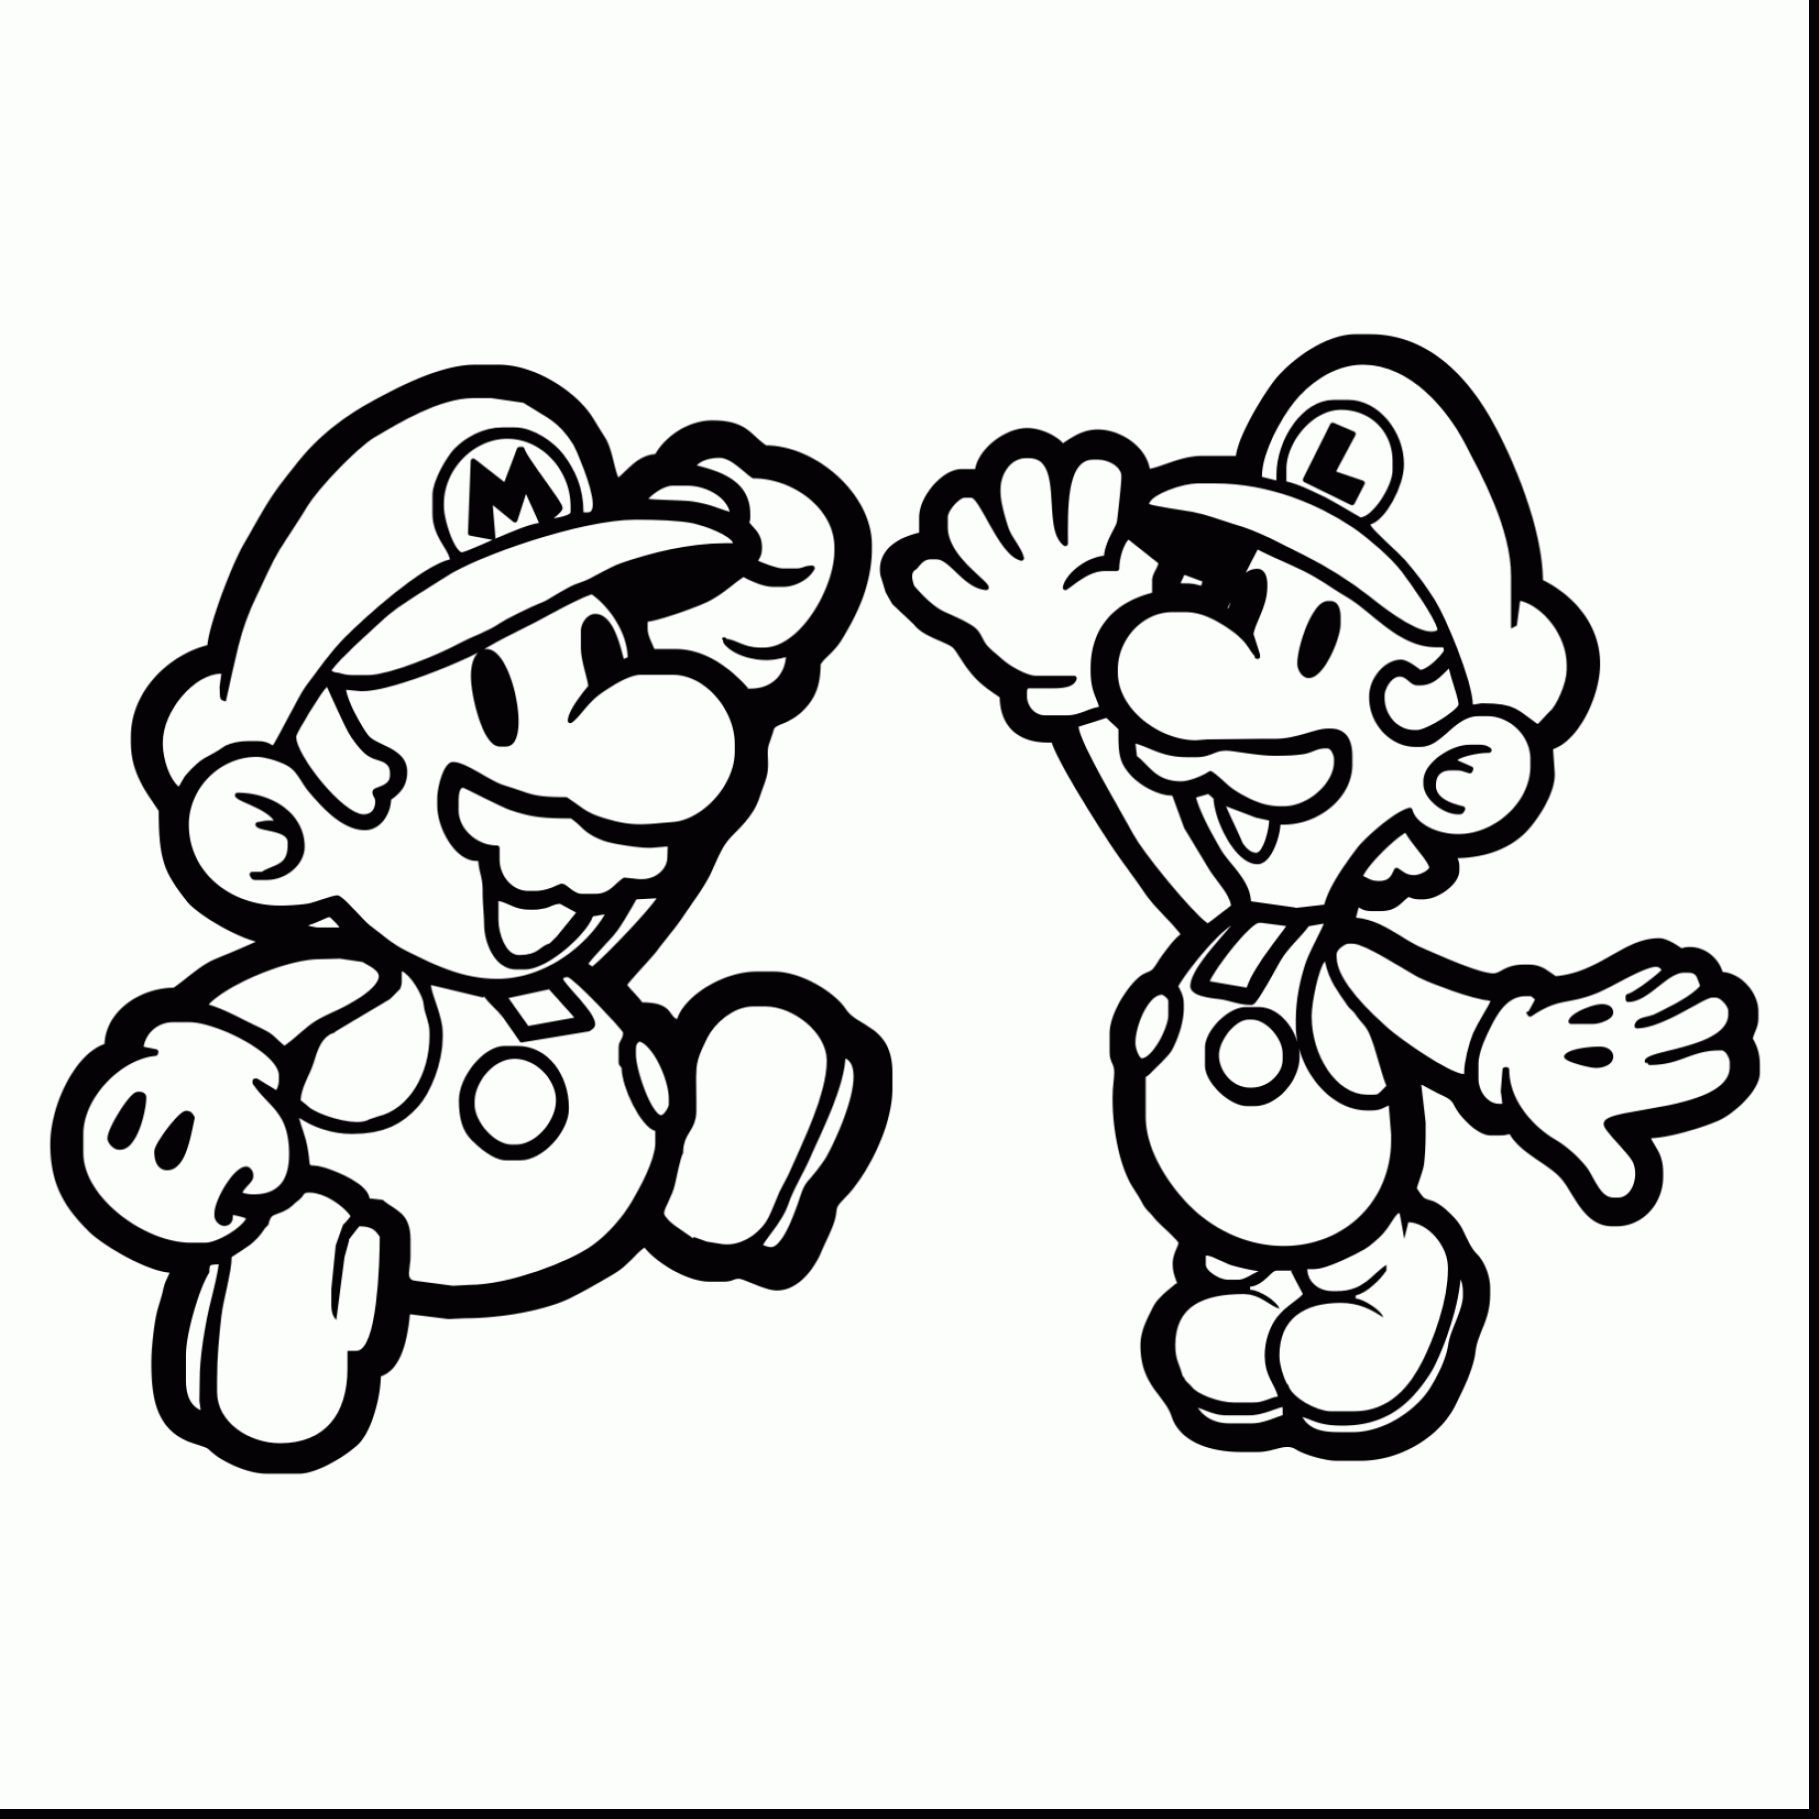 498 Unicorn Super Mario Characters Coloring Pages for Kindergarten